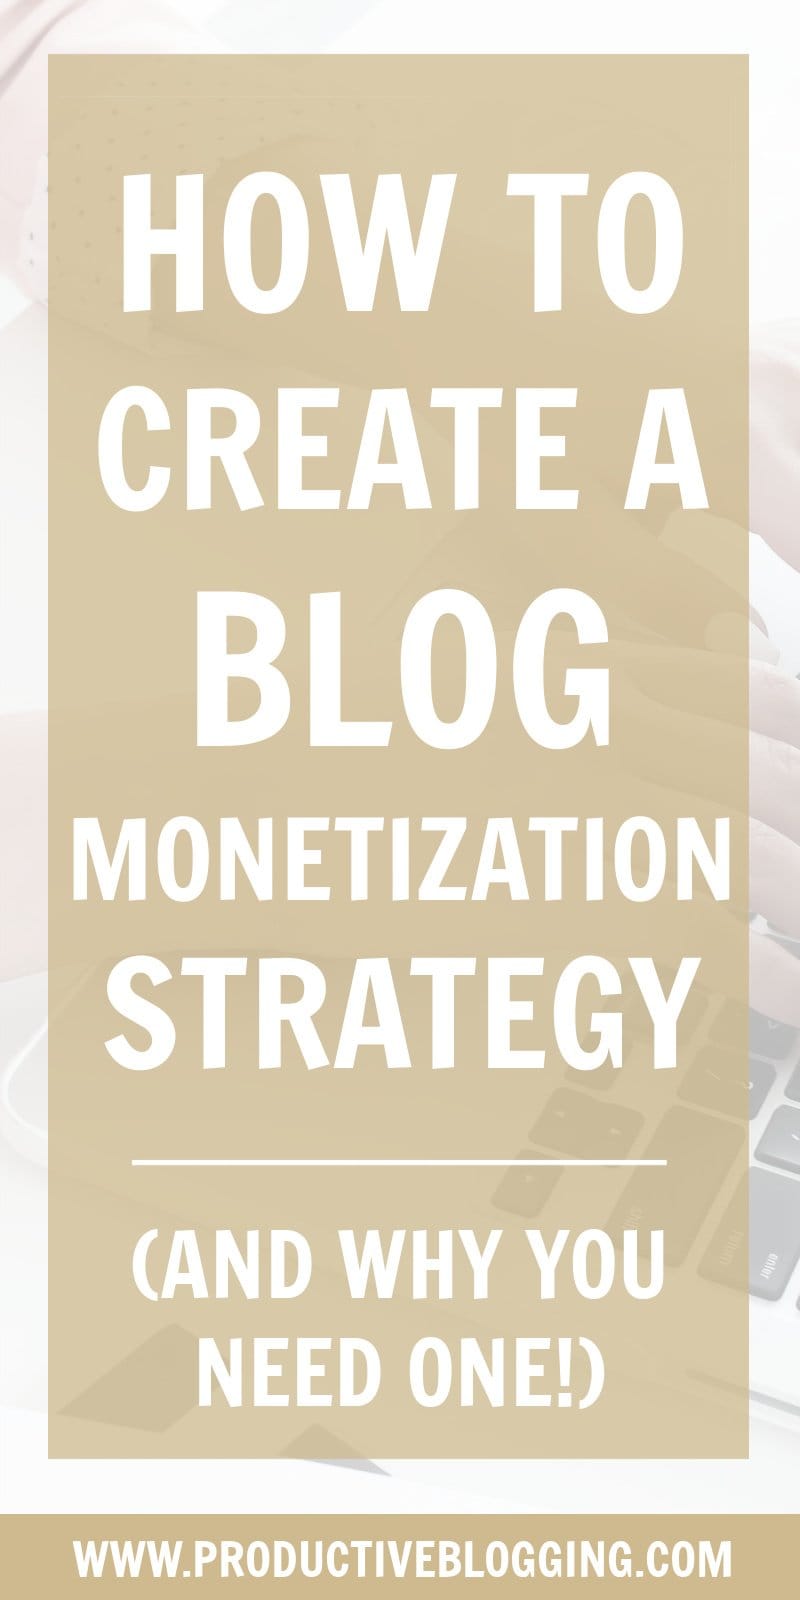 Blogging can be a very lucrative business model. But money won’t just land in your lap! You need to make a plan… and then put that plan into action! Here’s how to create a blog monetization strategy... #blogmonetization #blogmonetizationstrategy #makemoneyblogging #blog #blogging #blogger #professionalblogger #bloggingismyjob #solopreneur #mompreneur #fempreneur #bloggingbiz #bloggingtips #productivitytips #productivity #productivebloggingcommunity #BSNH #blogsmarternotharder #productiveblogging